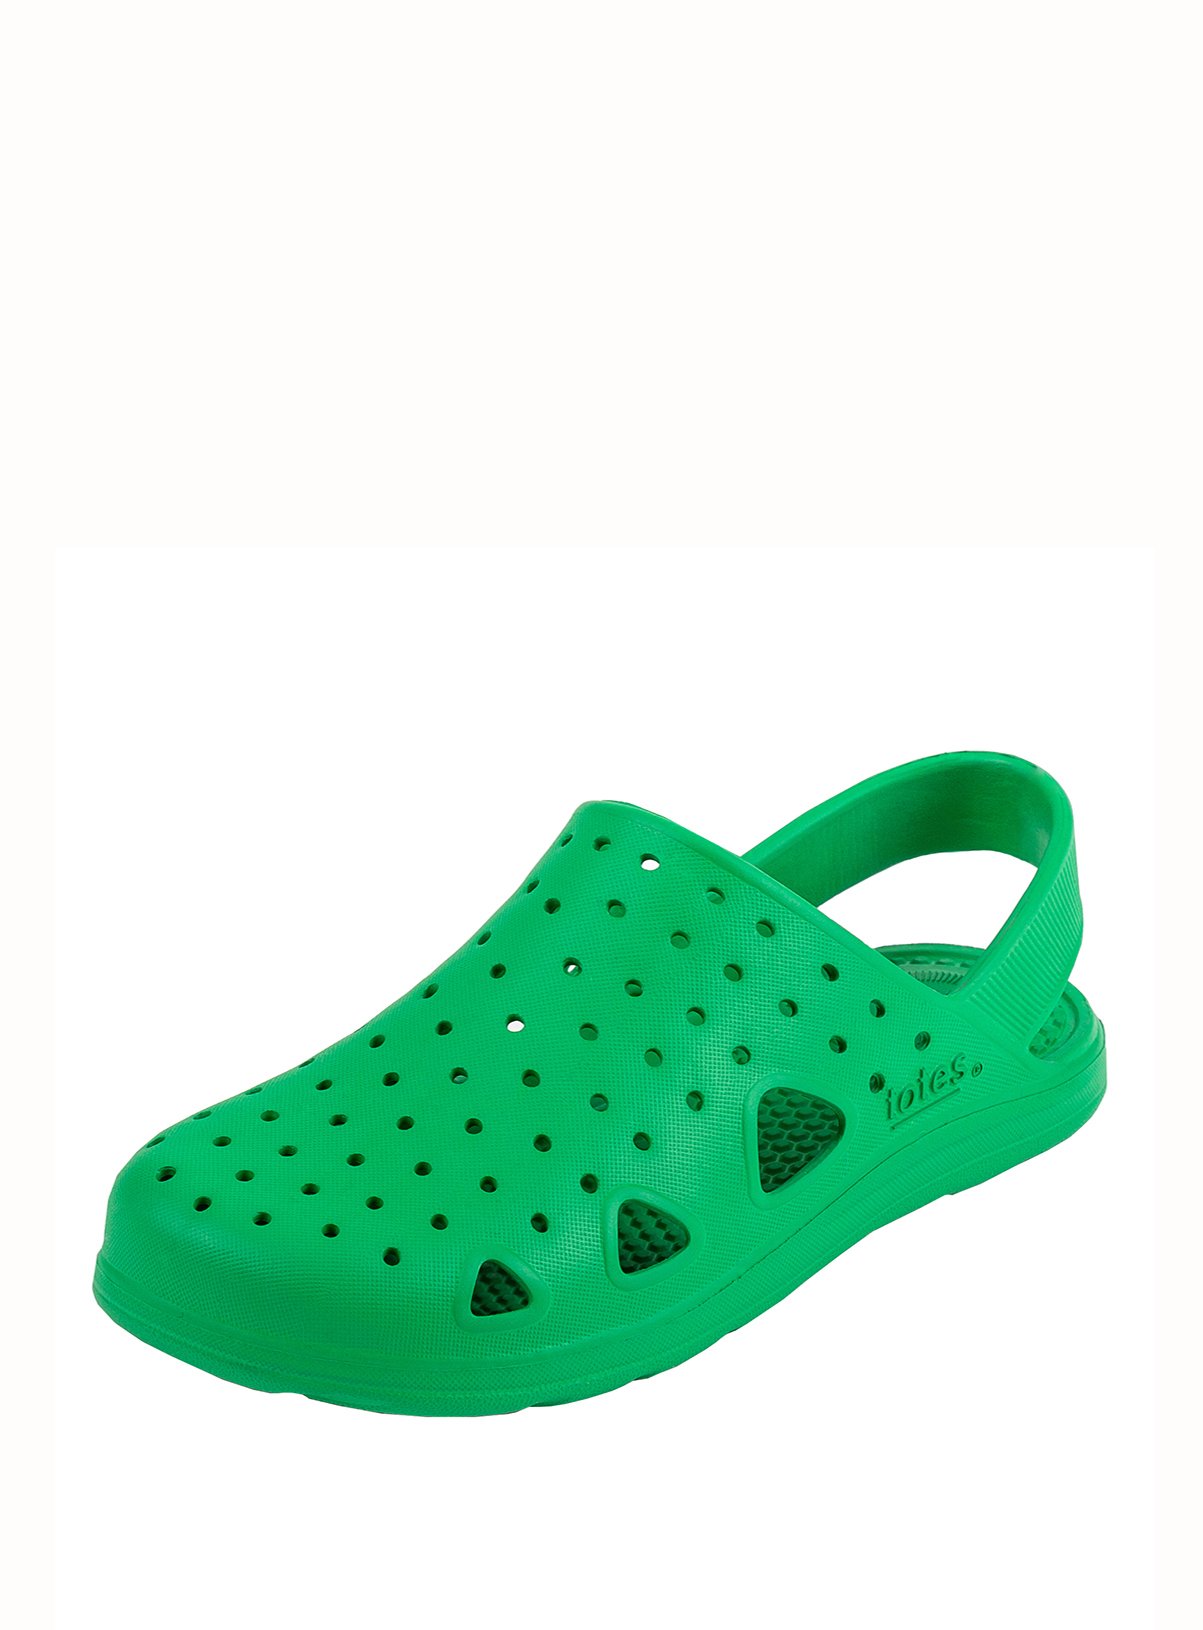 Sol Bounce Green Clogs Review